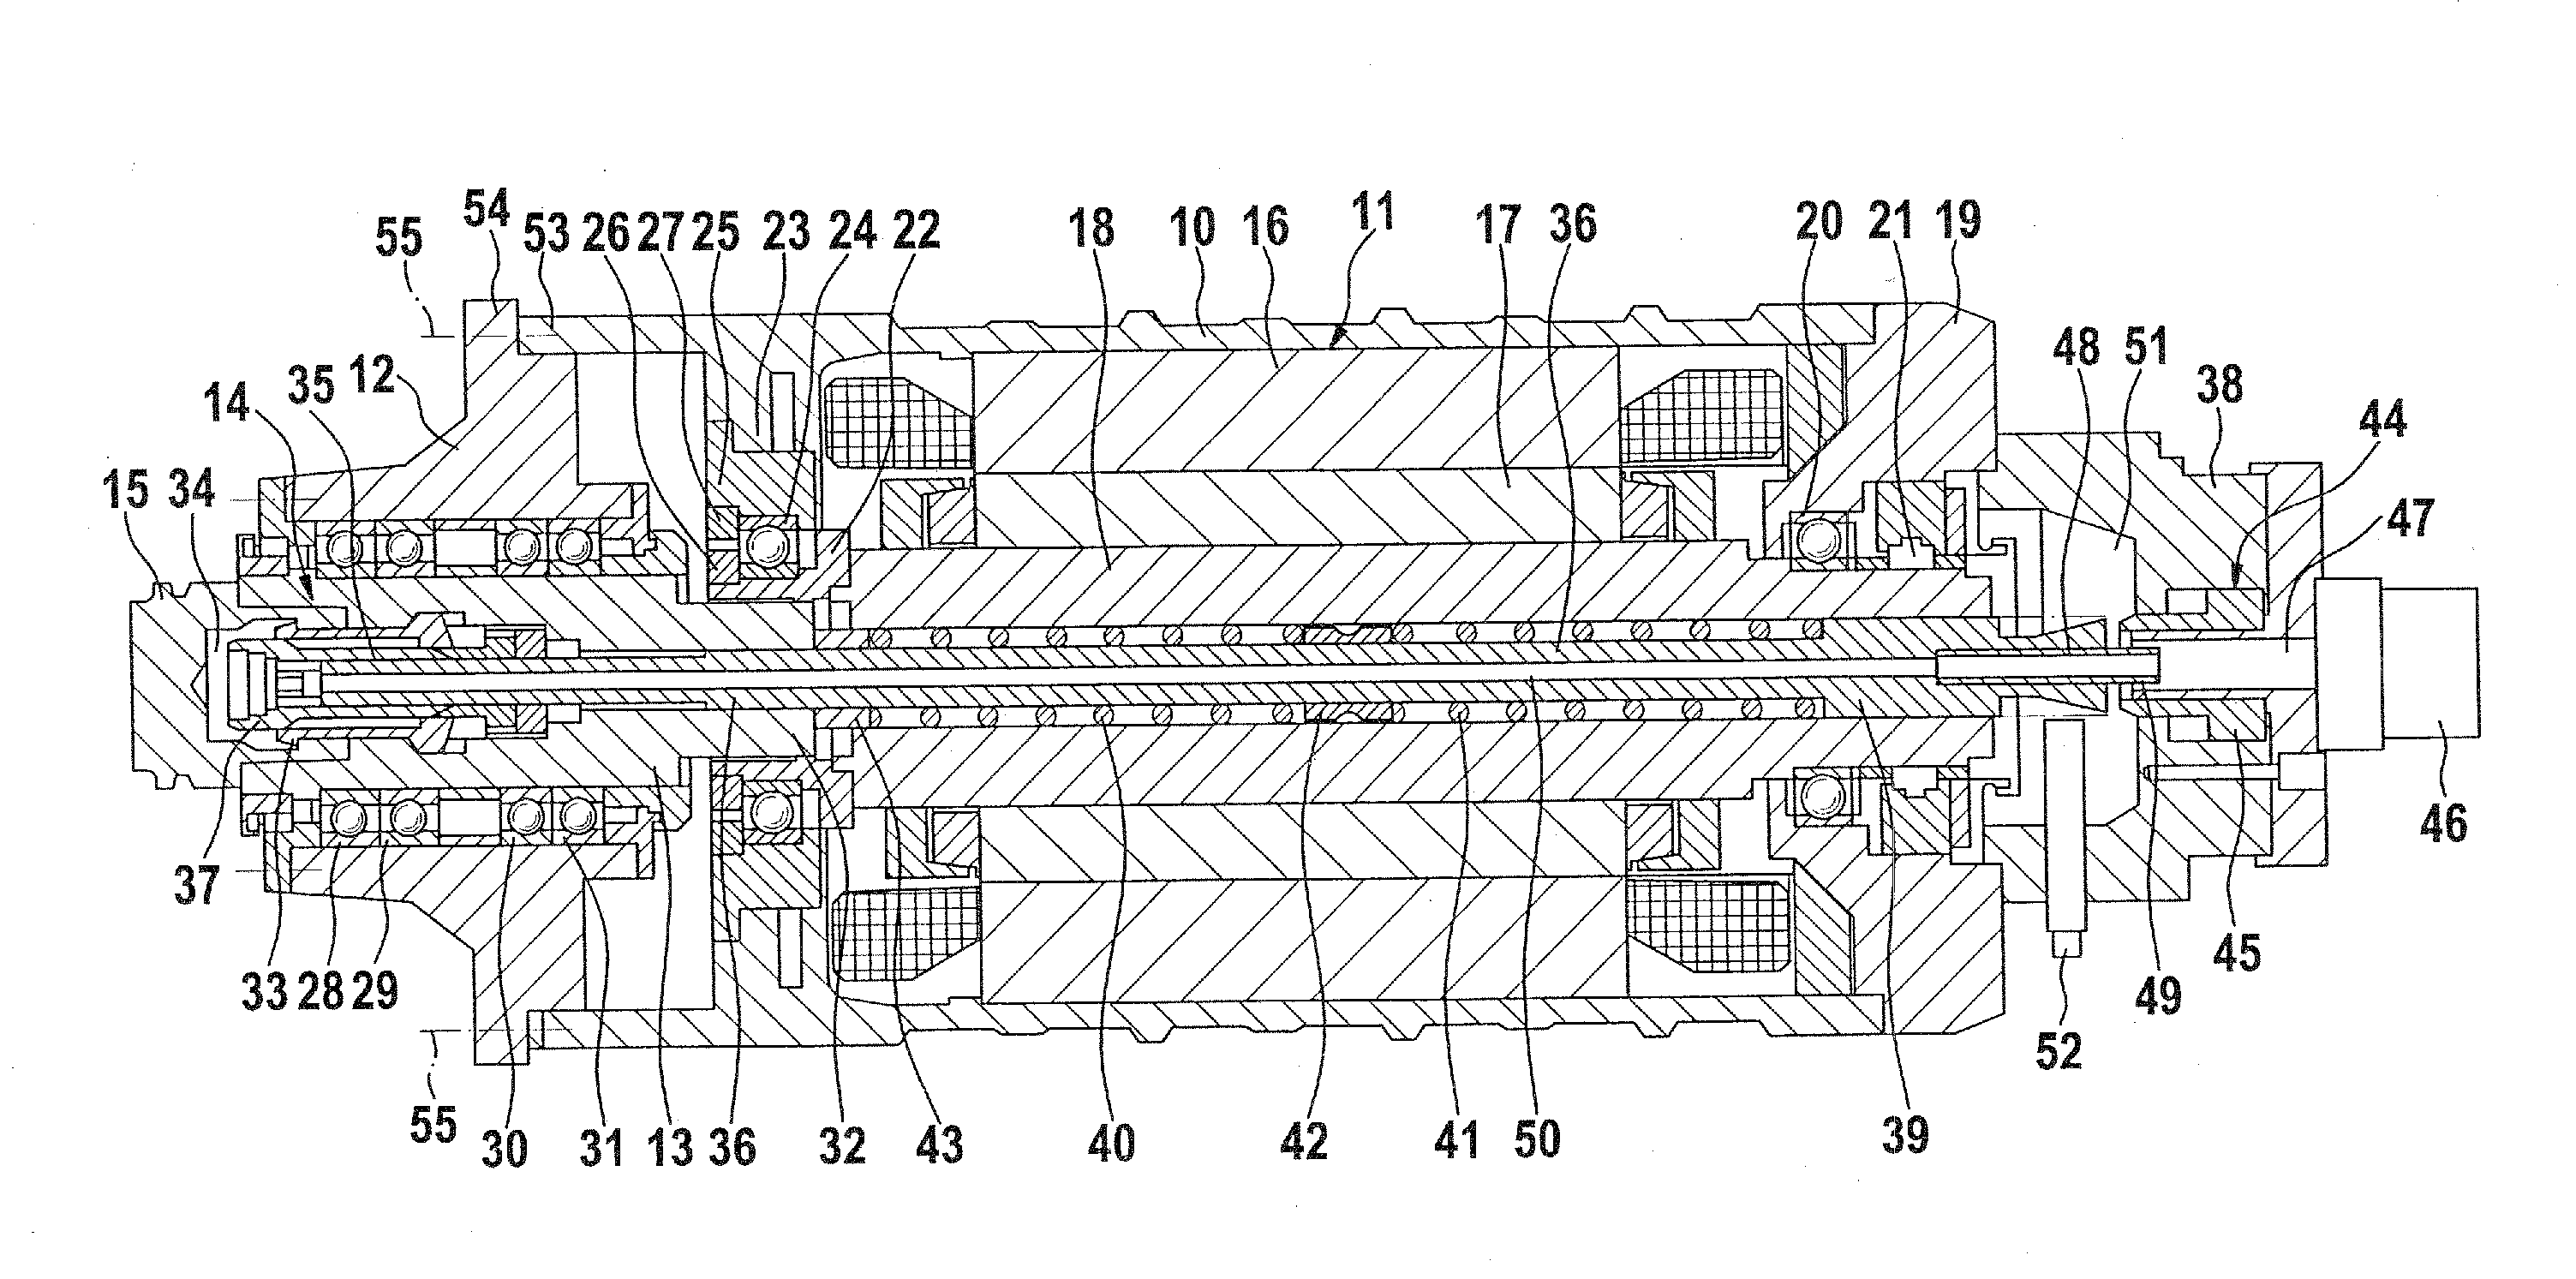 Motor spindle as a rotary drive for tools on a machine tool